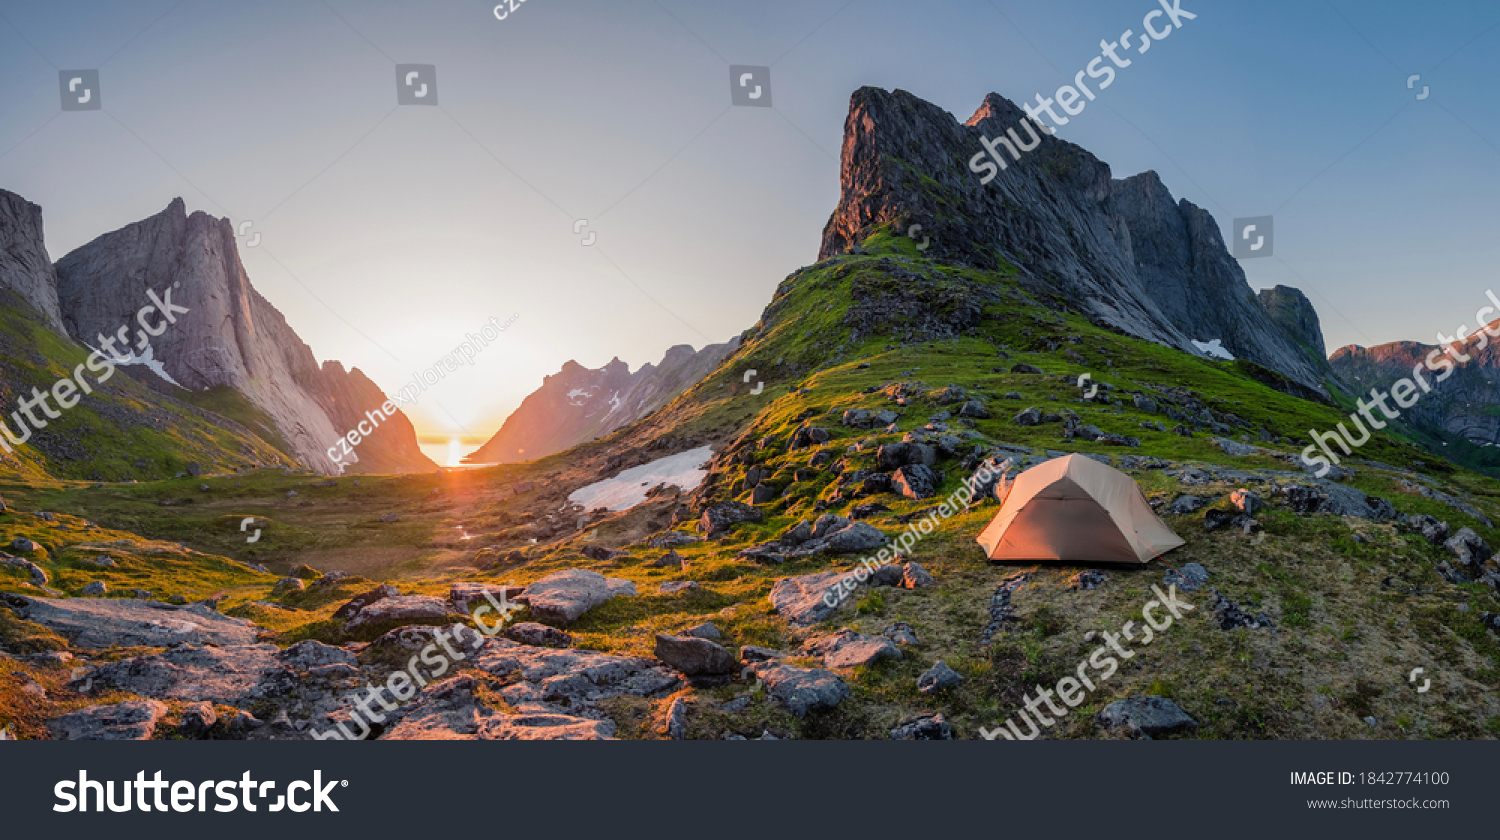 wild camping in the lofoten islands. camping tent among mountains. sunset over camping spot behind polar circle. Panorama of perfect landscape during midnight sun #1842774100